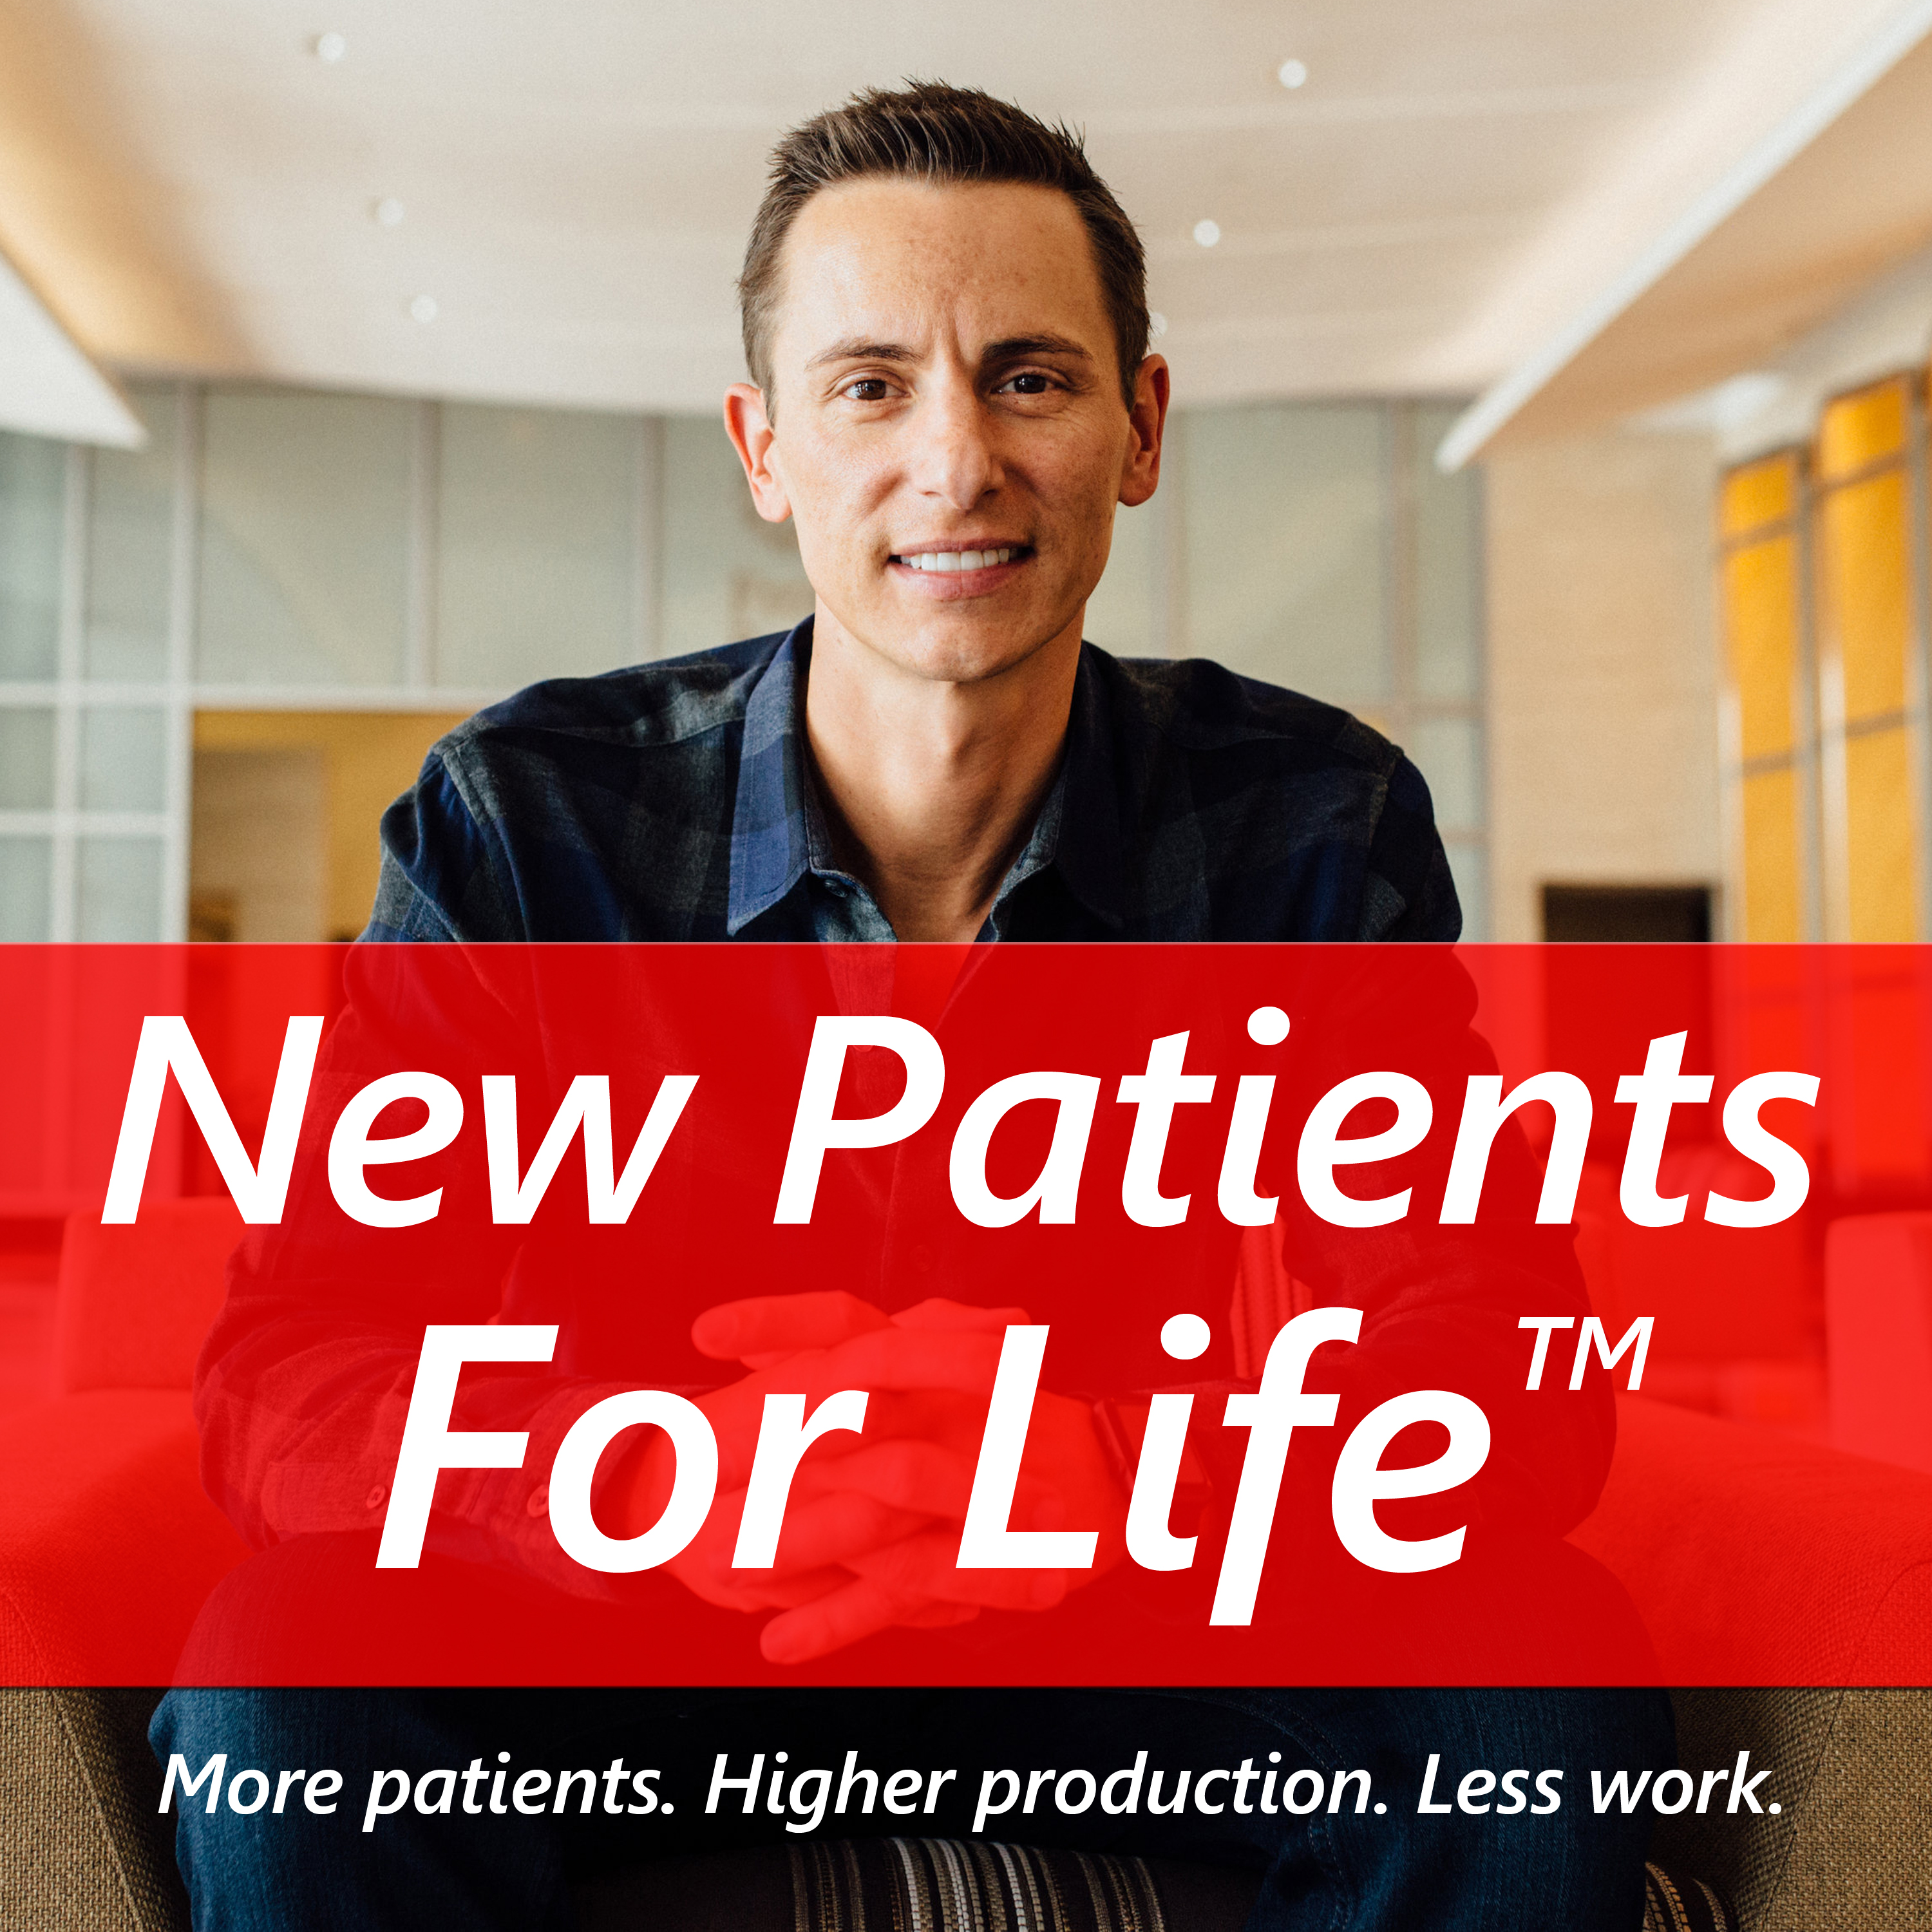 New Patients For Life™